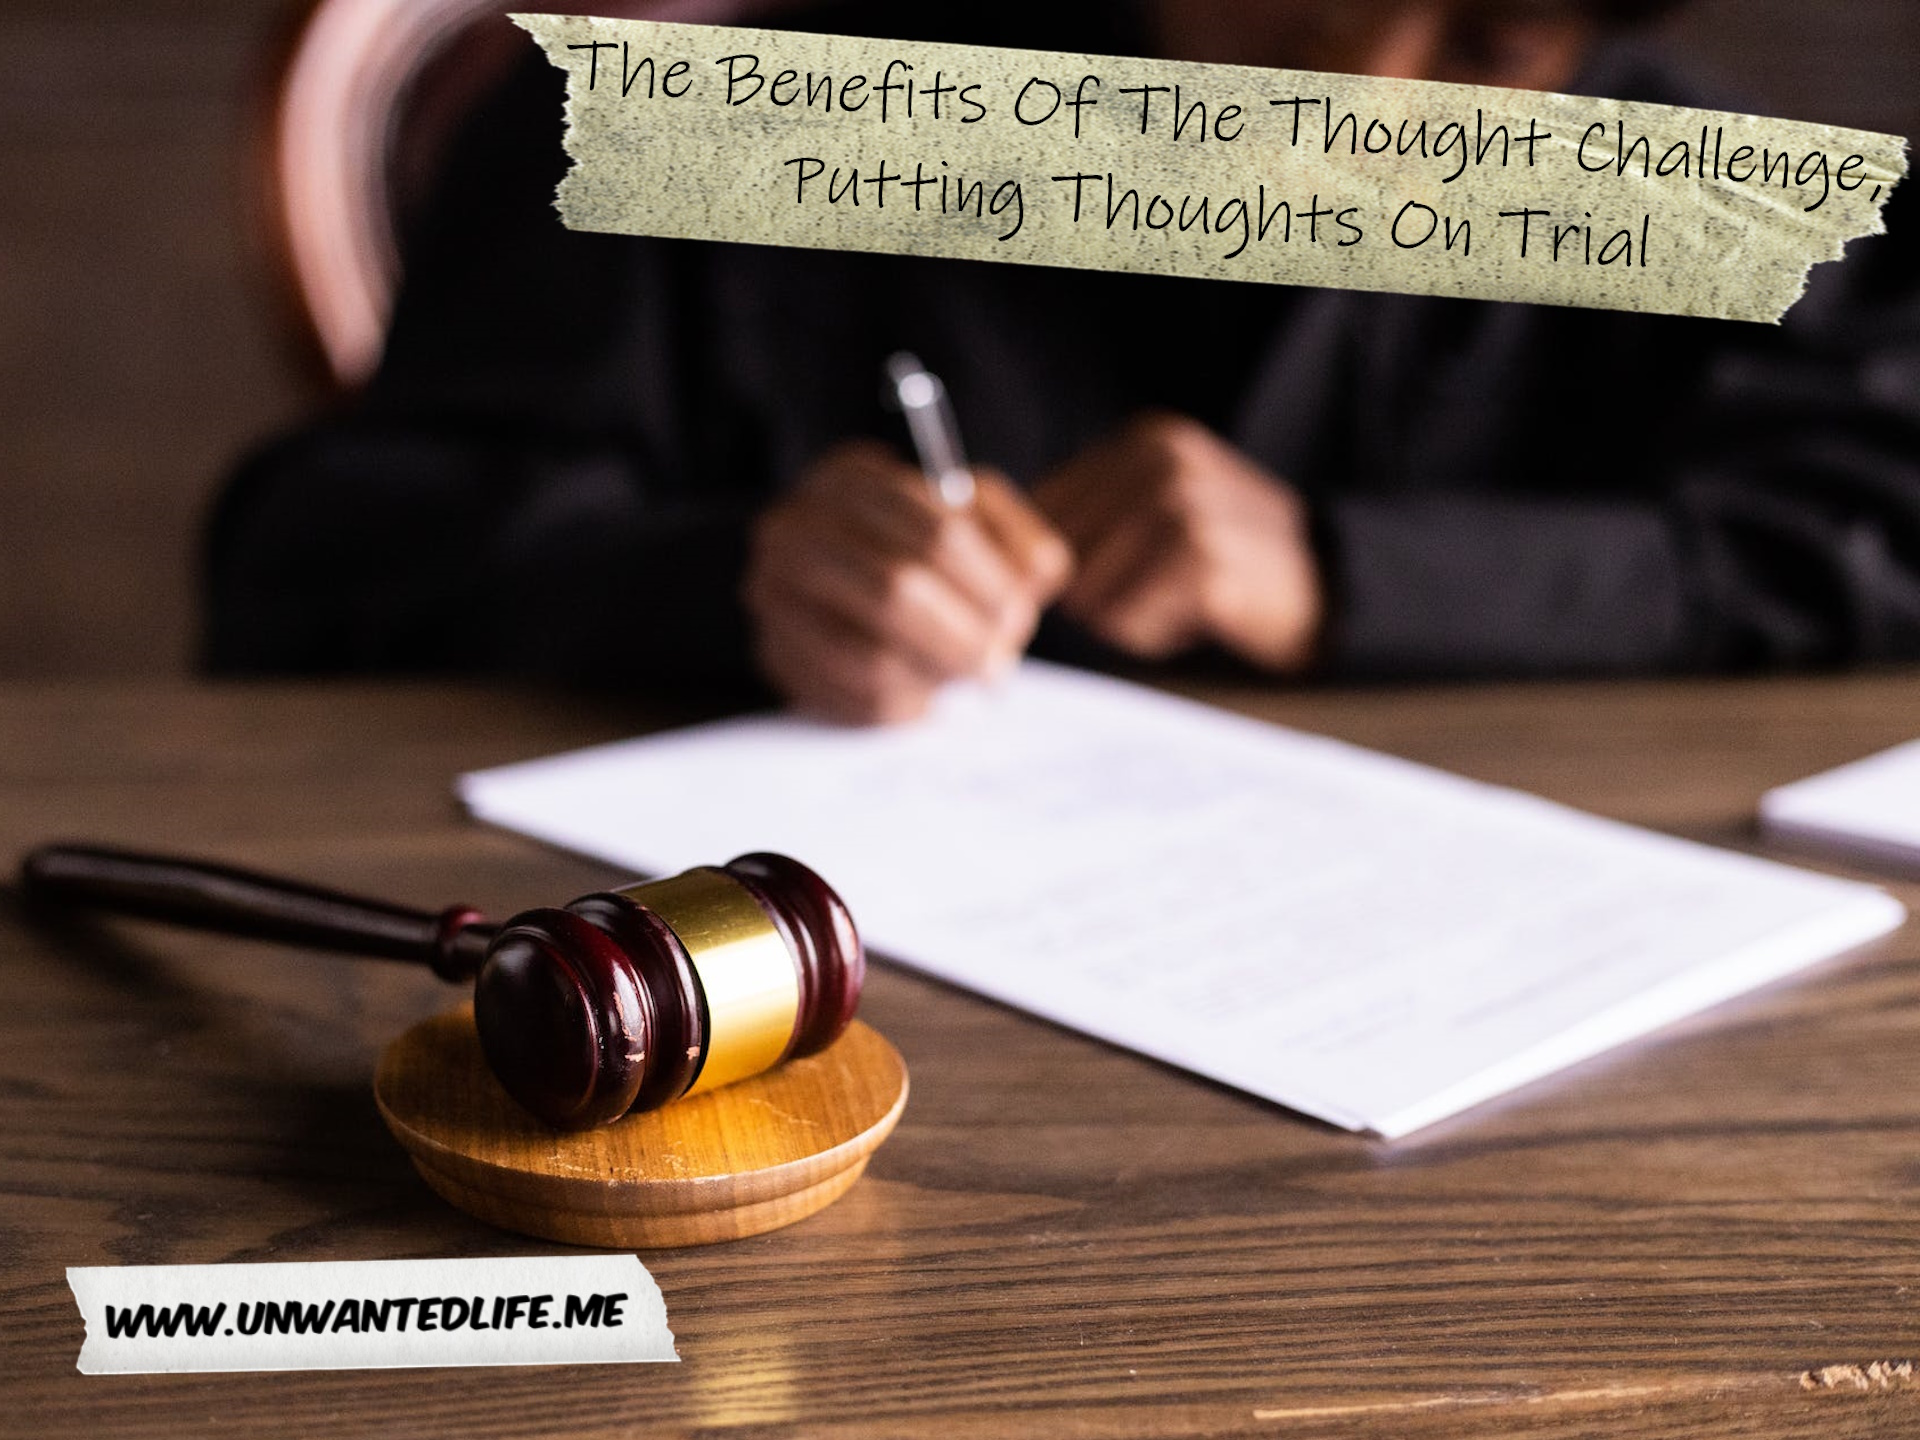 A photo of a Black judge filling in paperwork with their gavel in the foreground to represent the topic of the article - The Benefits Of The Thought Challenge, Putting Thoughts On Trial